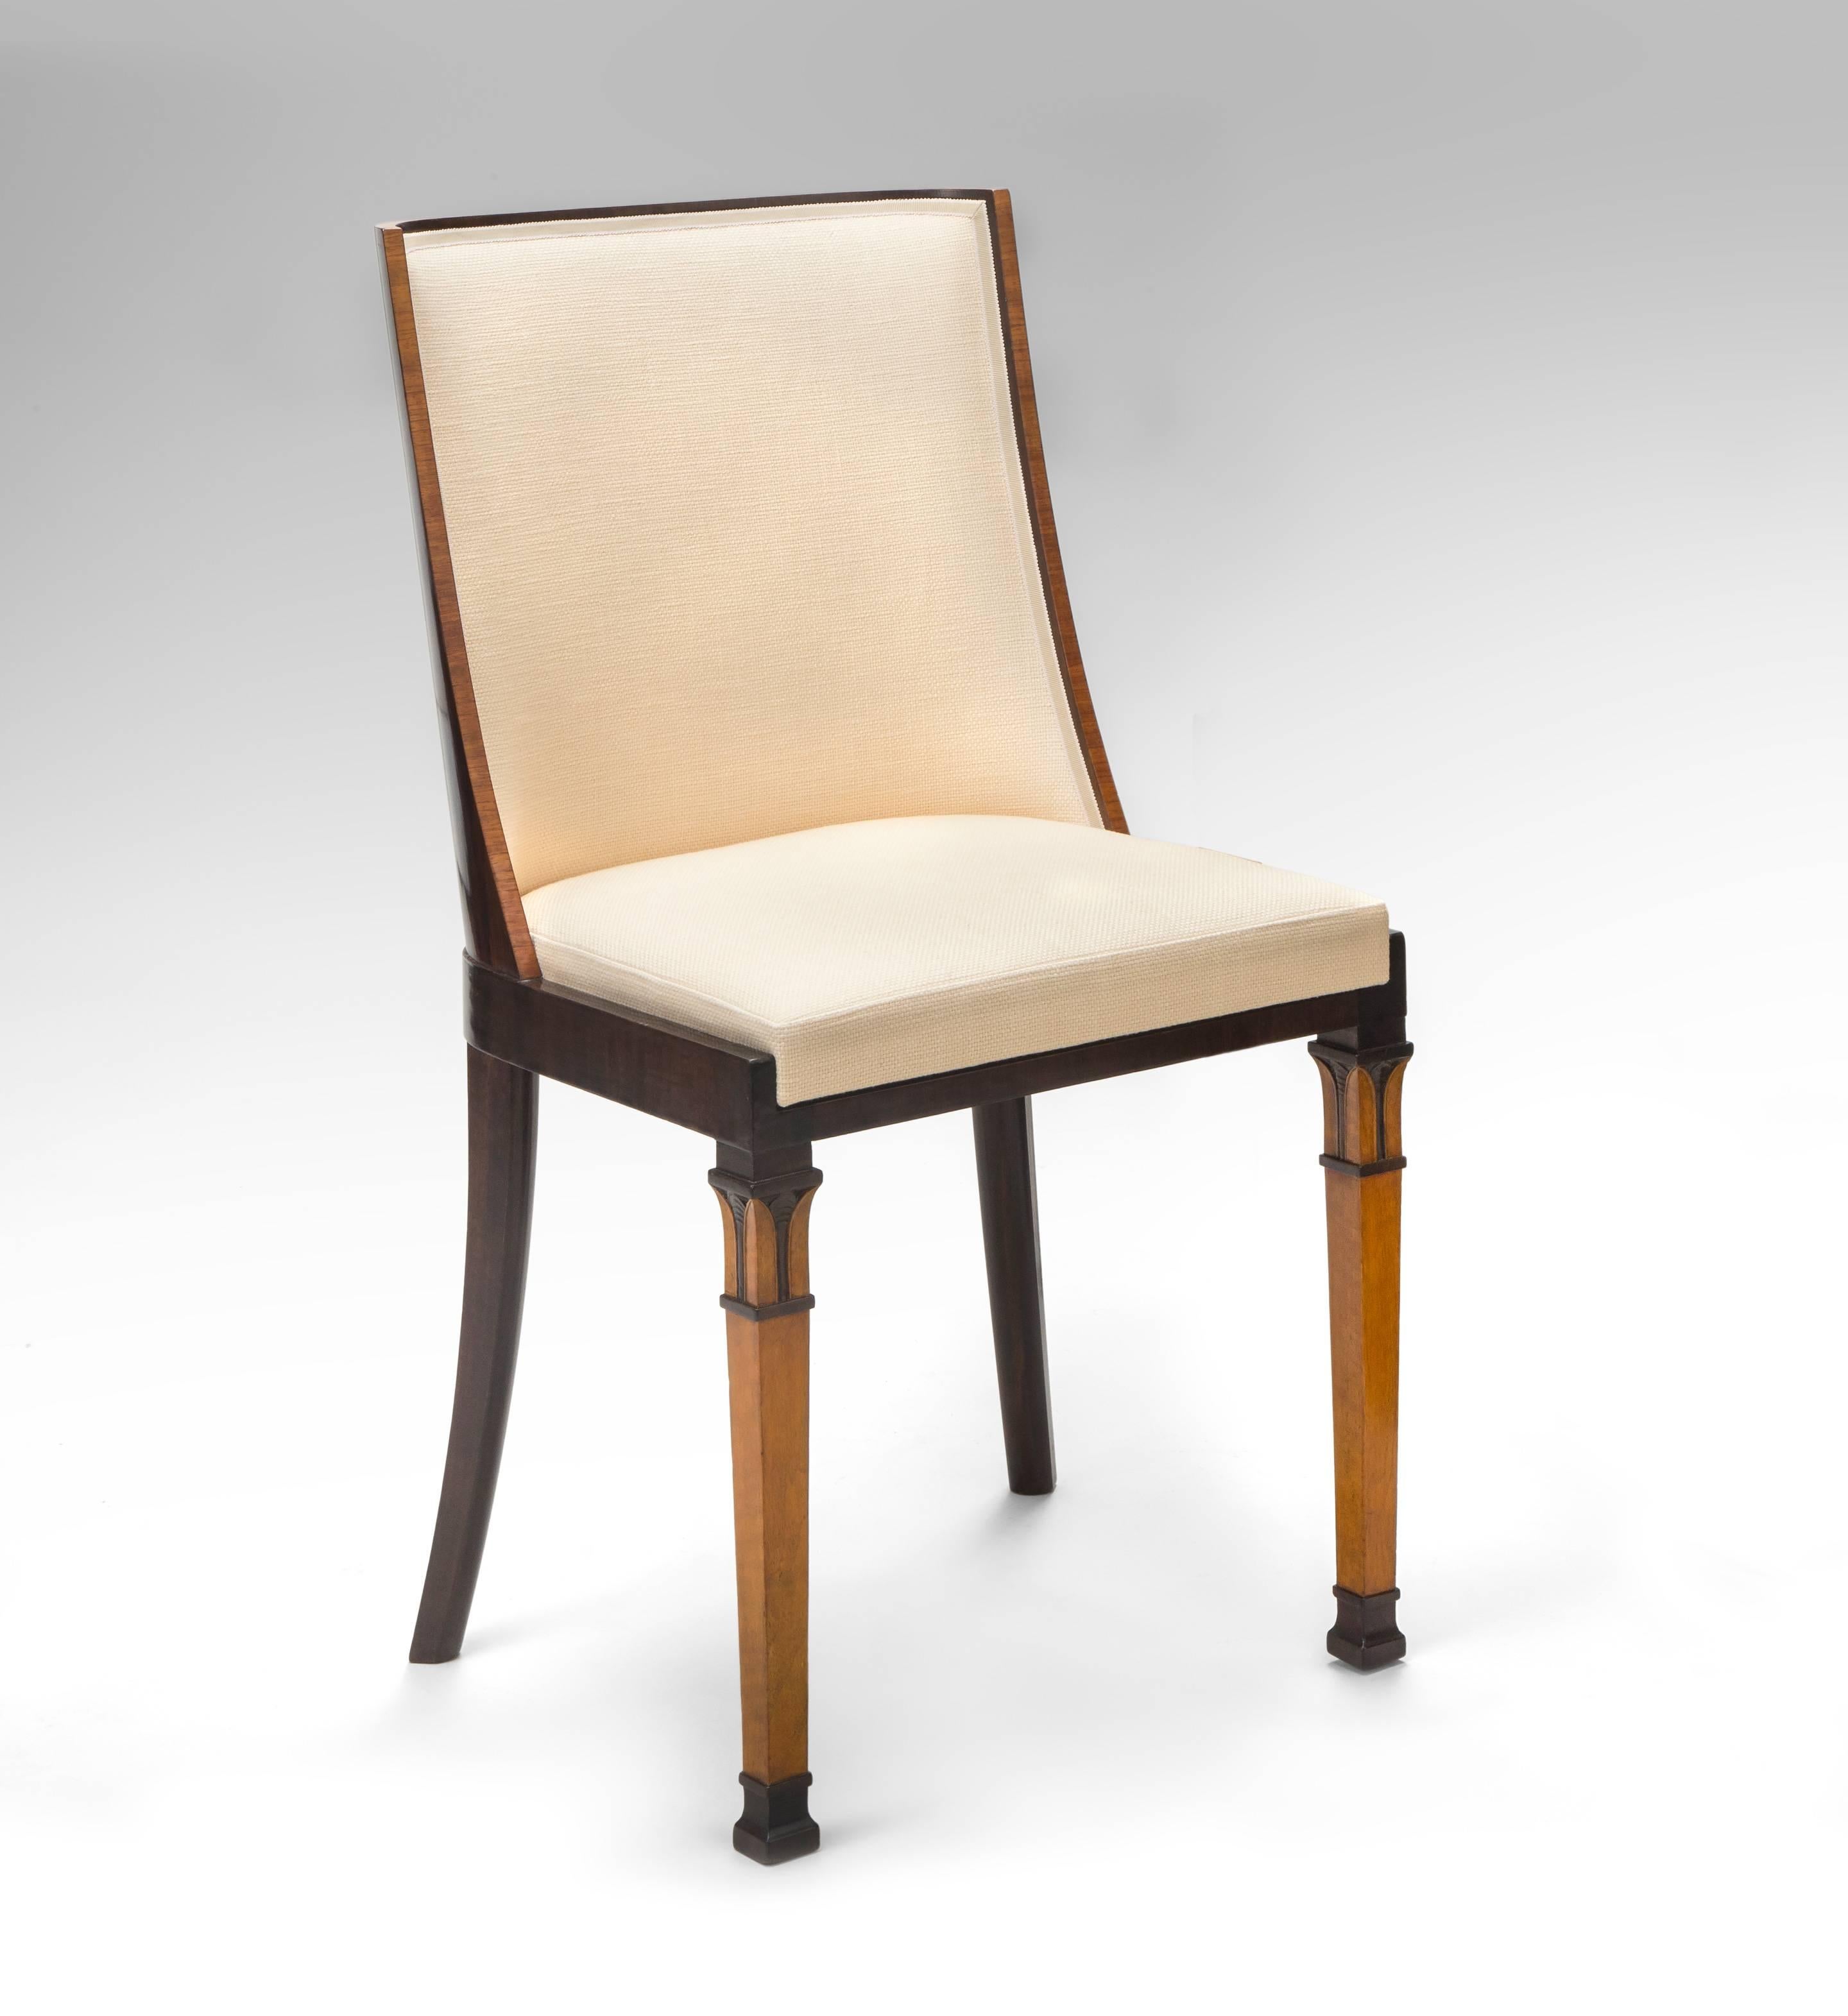 The back inlaid with a marquetry panel of an urn flanked by scrolls, the inner back upholstered, the rectangular seat on square tapering legs front and saber legs back.

Very good condition, expertly restored, newly upholstered, and ready to add to